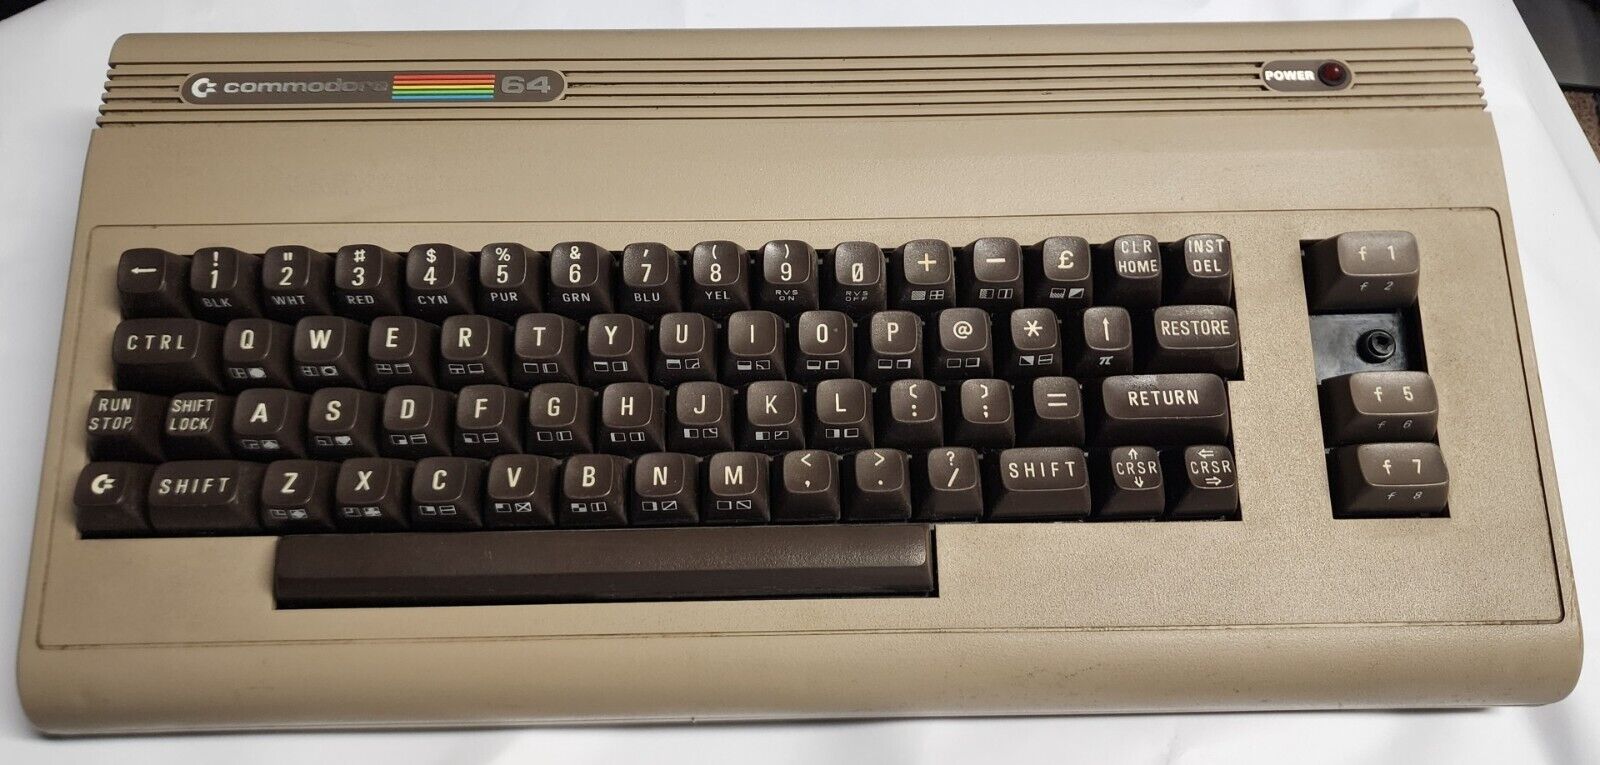 Commodore 64 Computer Keyboard, Untested